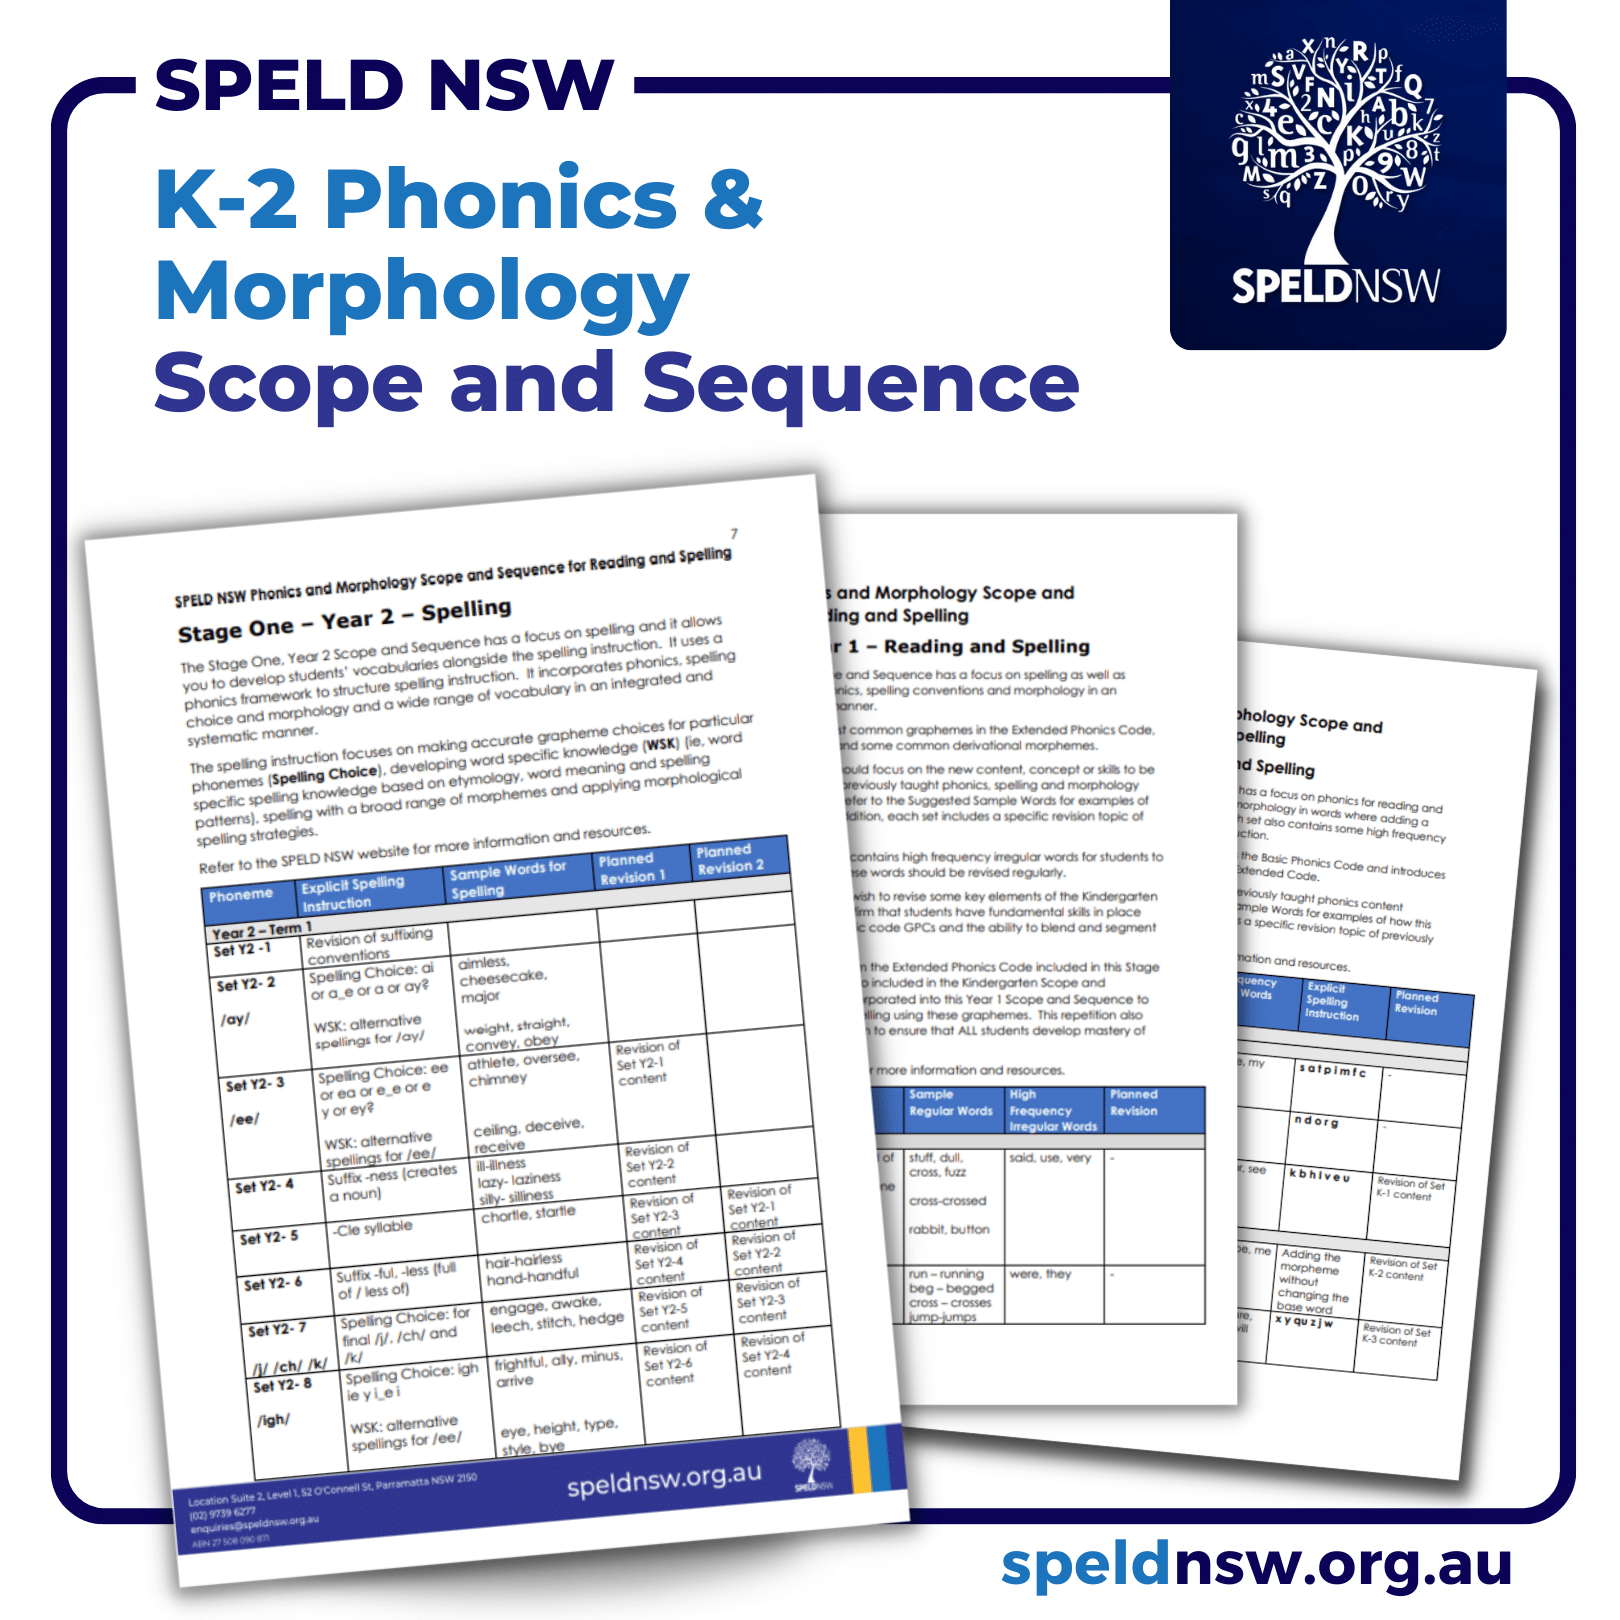 SPELD NSW K-2 Phonics and Morphology Scope and Sequence